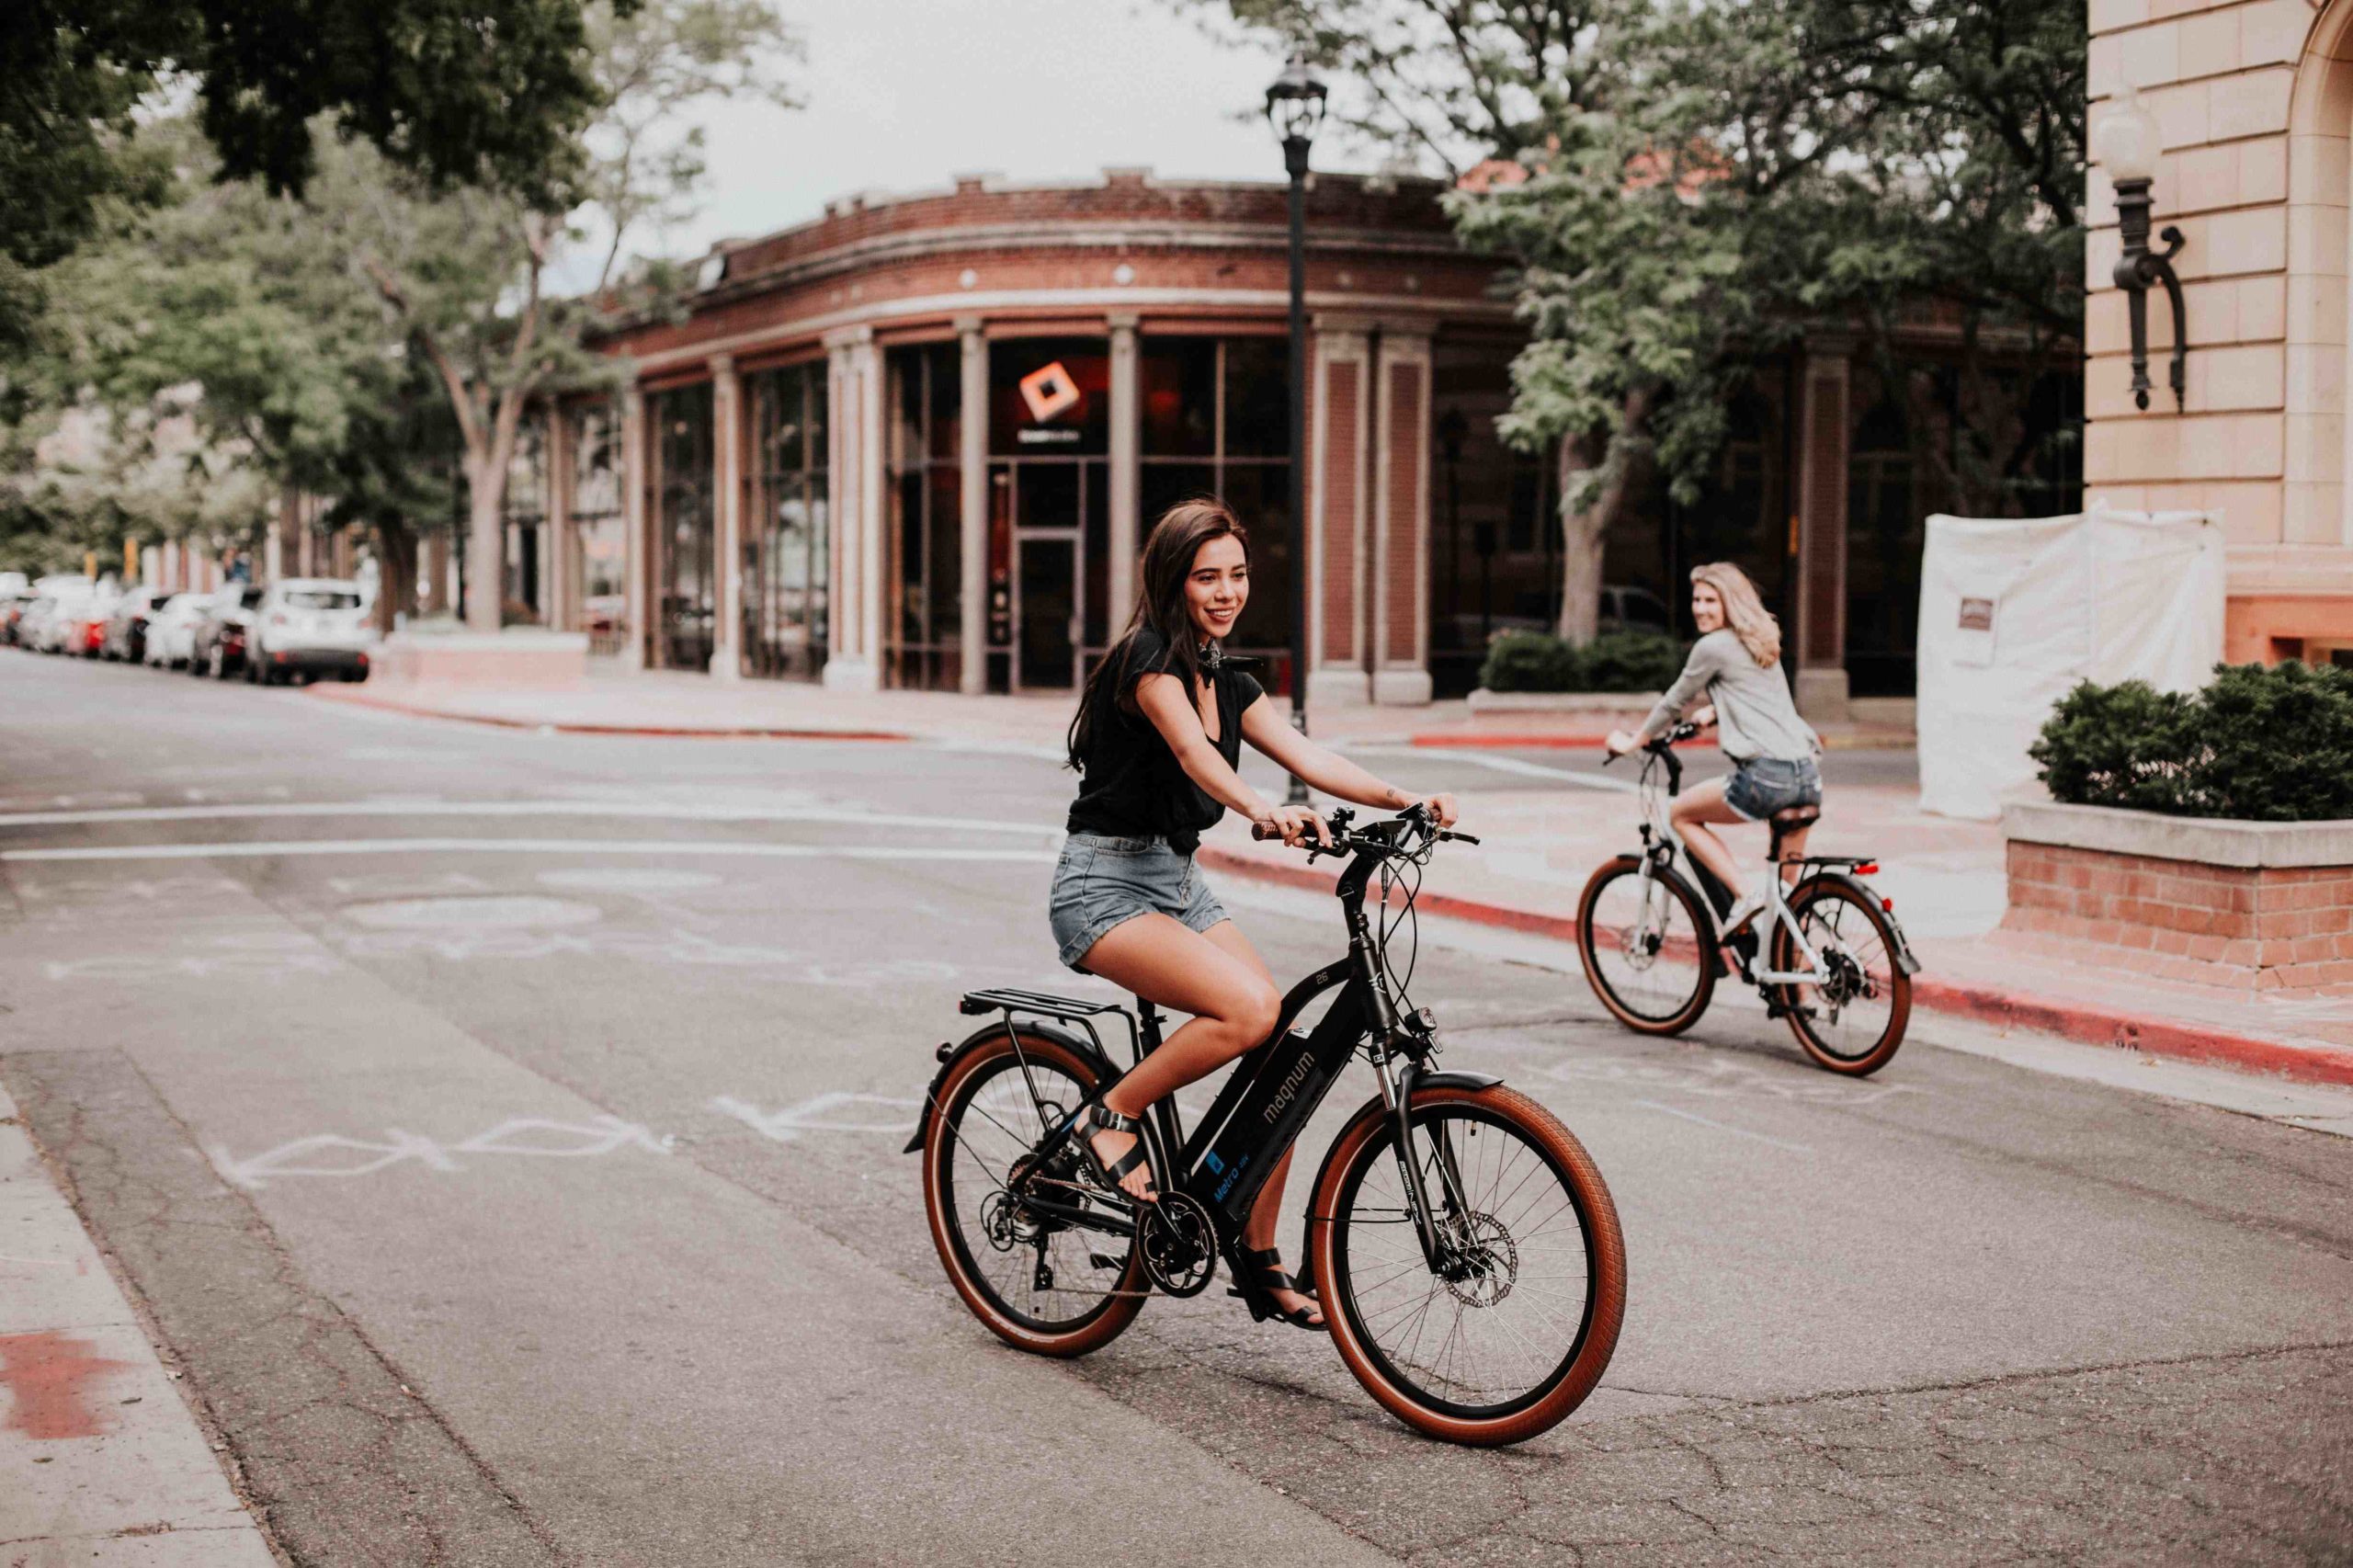 Do you need a license for an electric bike in Utah?